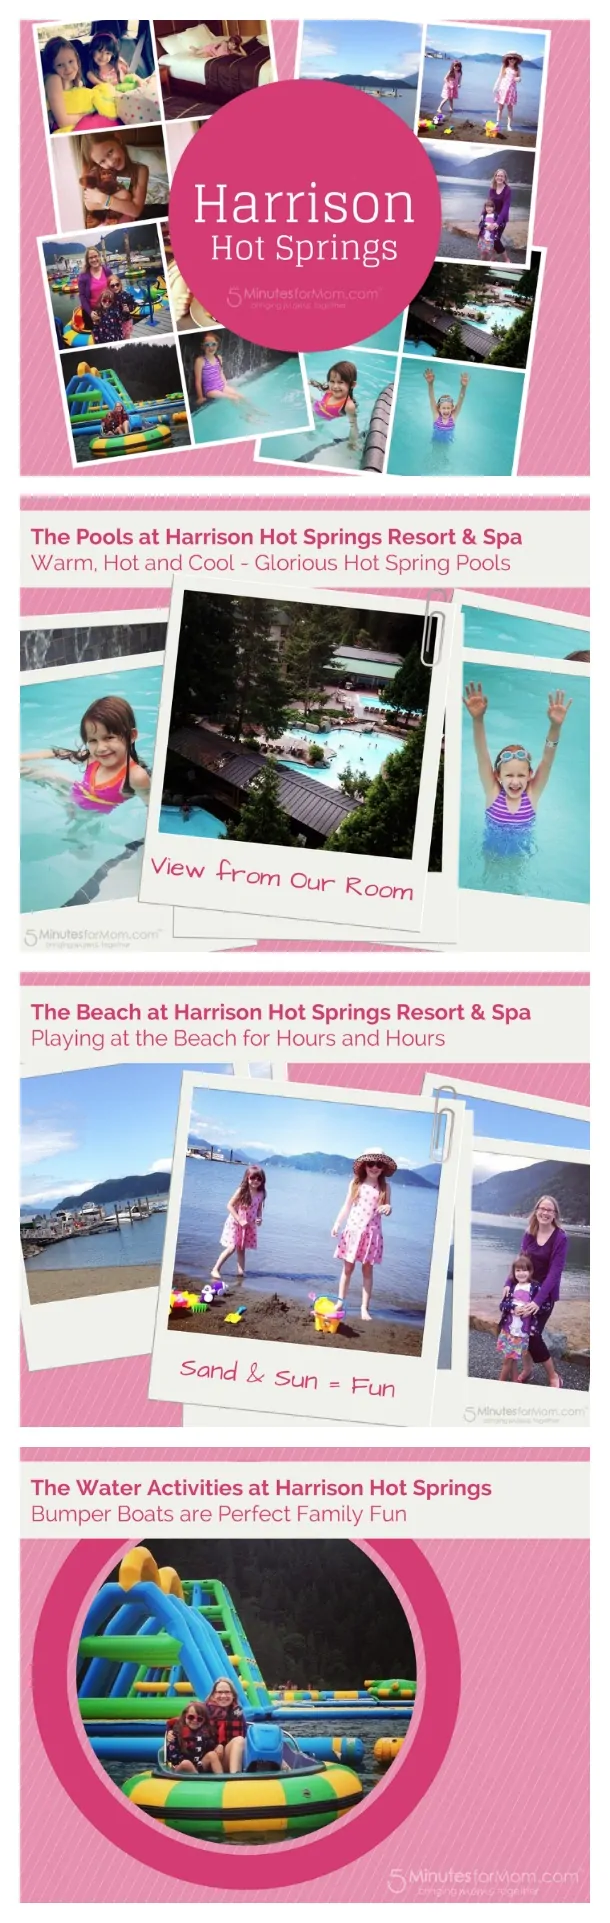 Harrison Hot Springs Resort and Spa Review - Family Travel